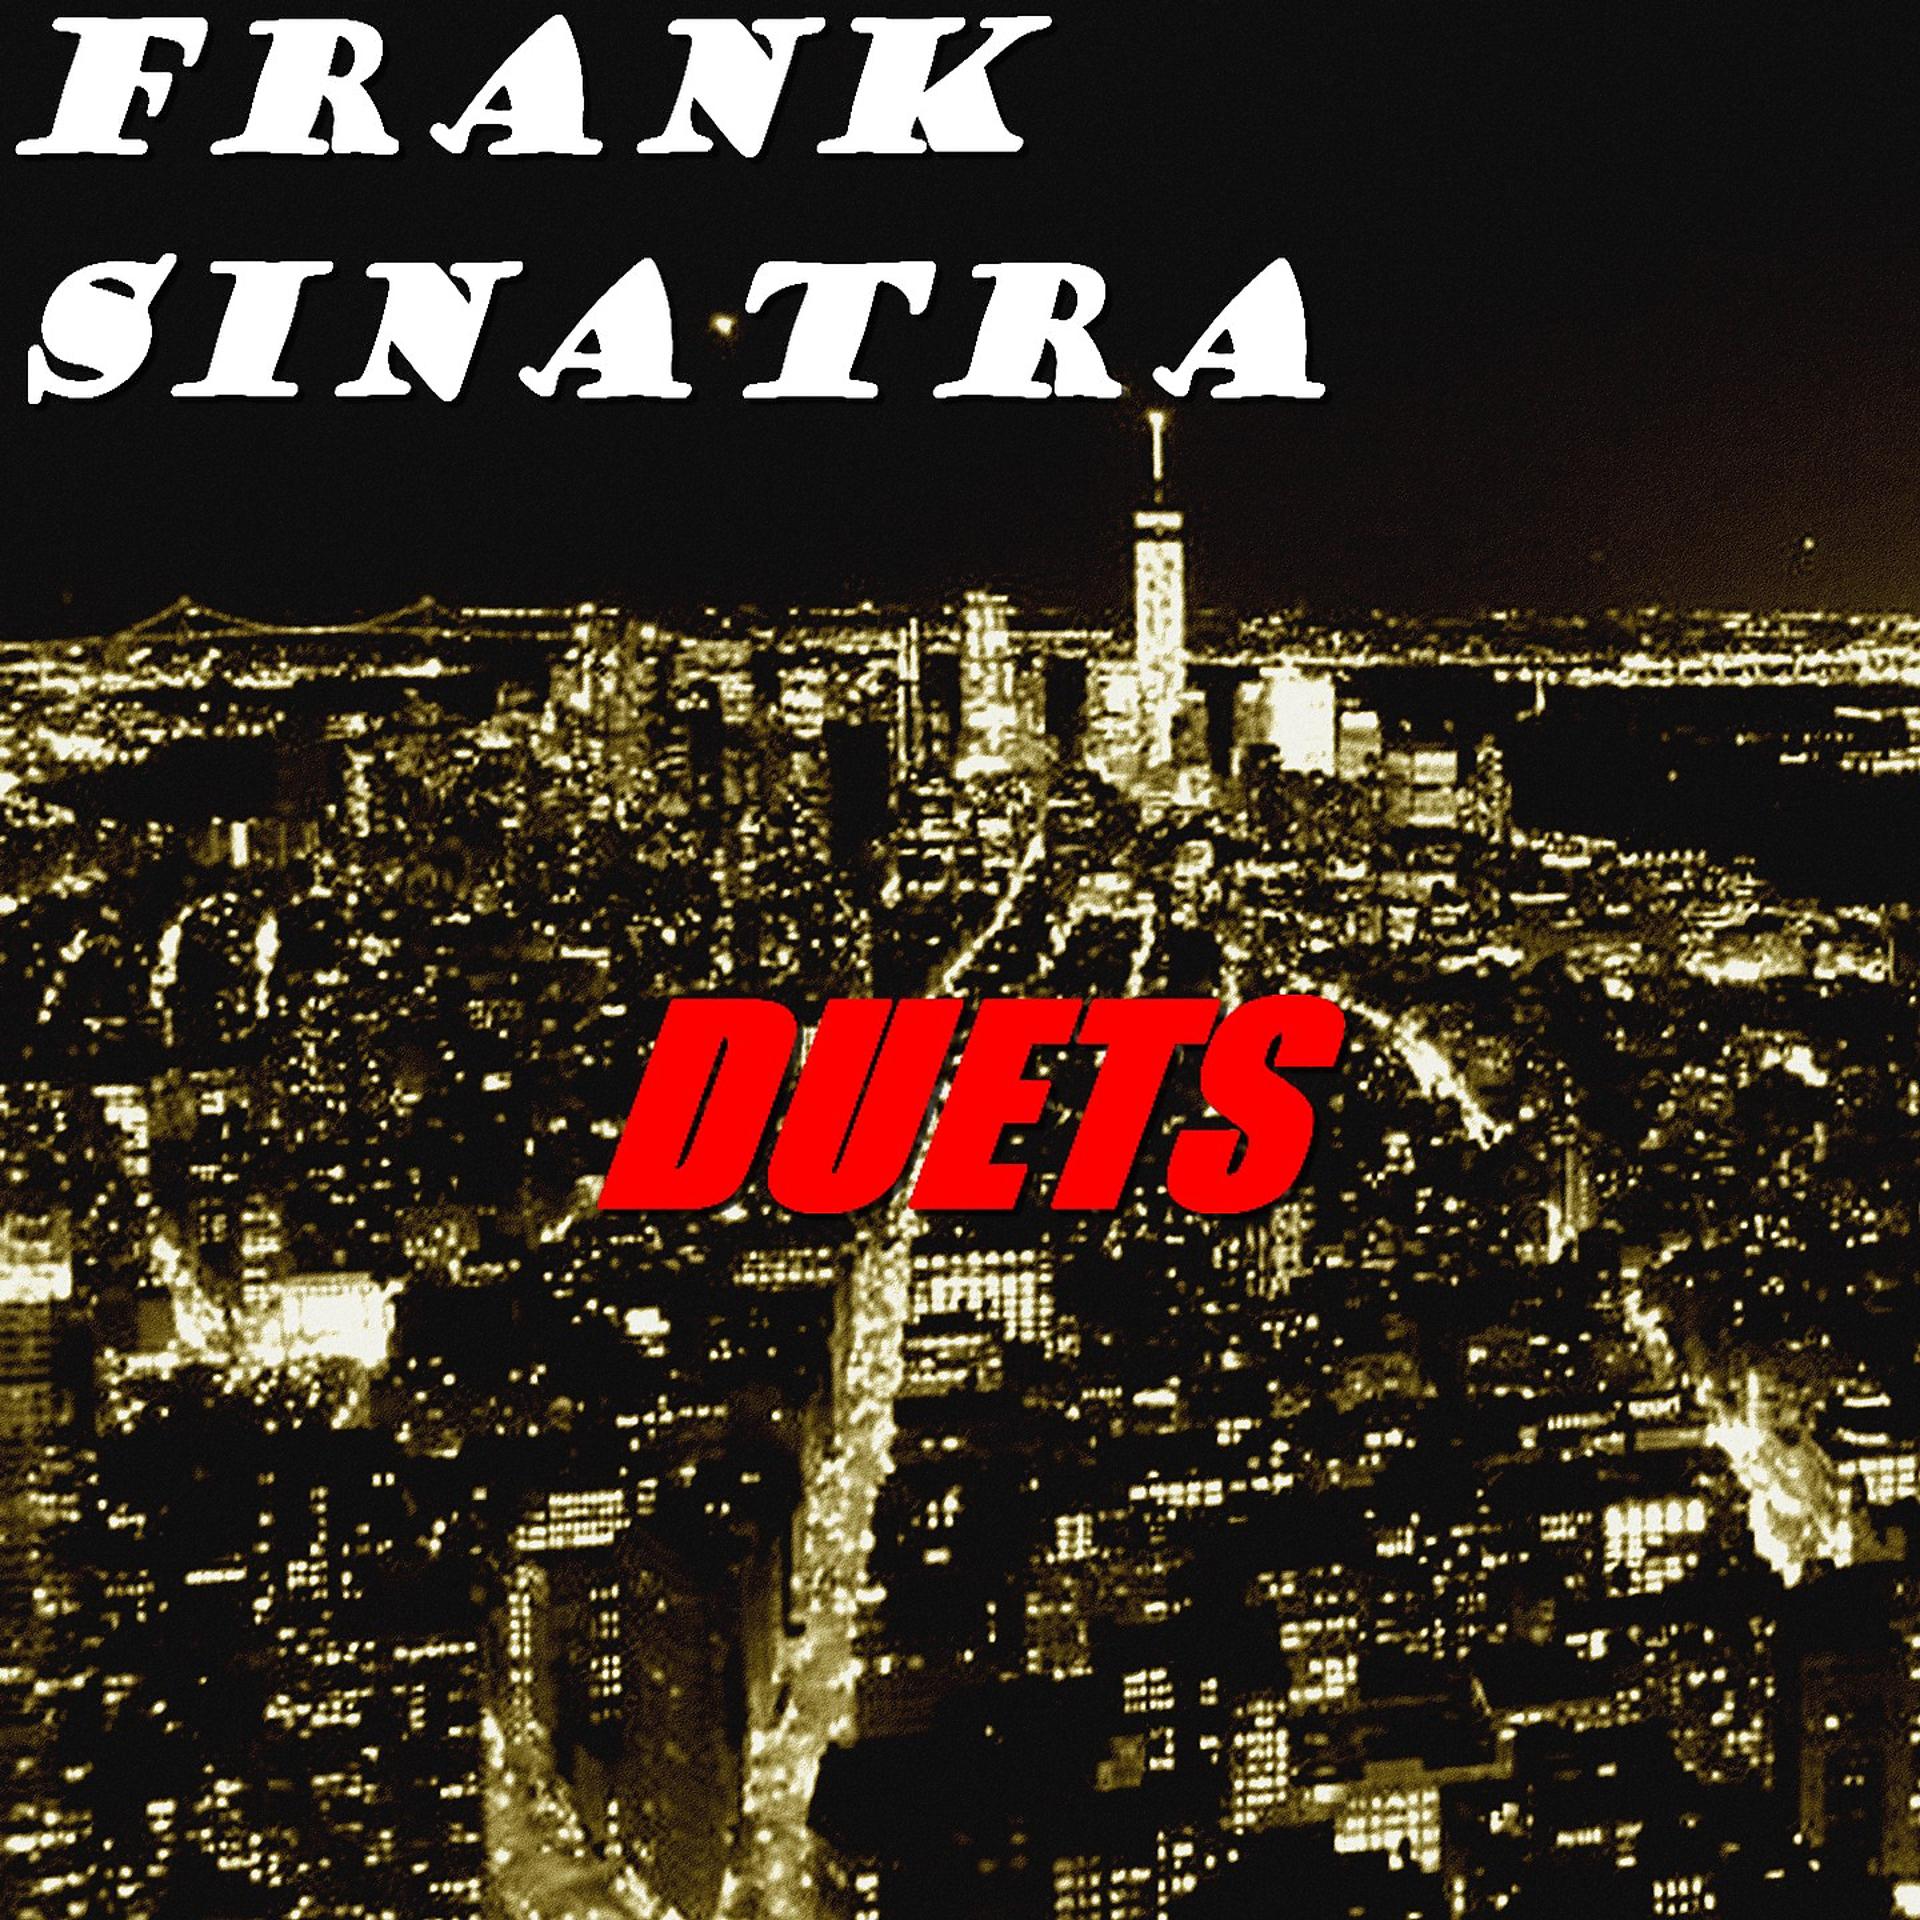 Frank Sinatra "Duets". Frank Sinatra - the Birth of the Blues. Frank Sinatra - best of Duets. Sinatra and Louis Armstrong Birth of the Blues. Фрэнк треки